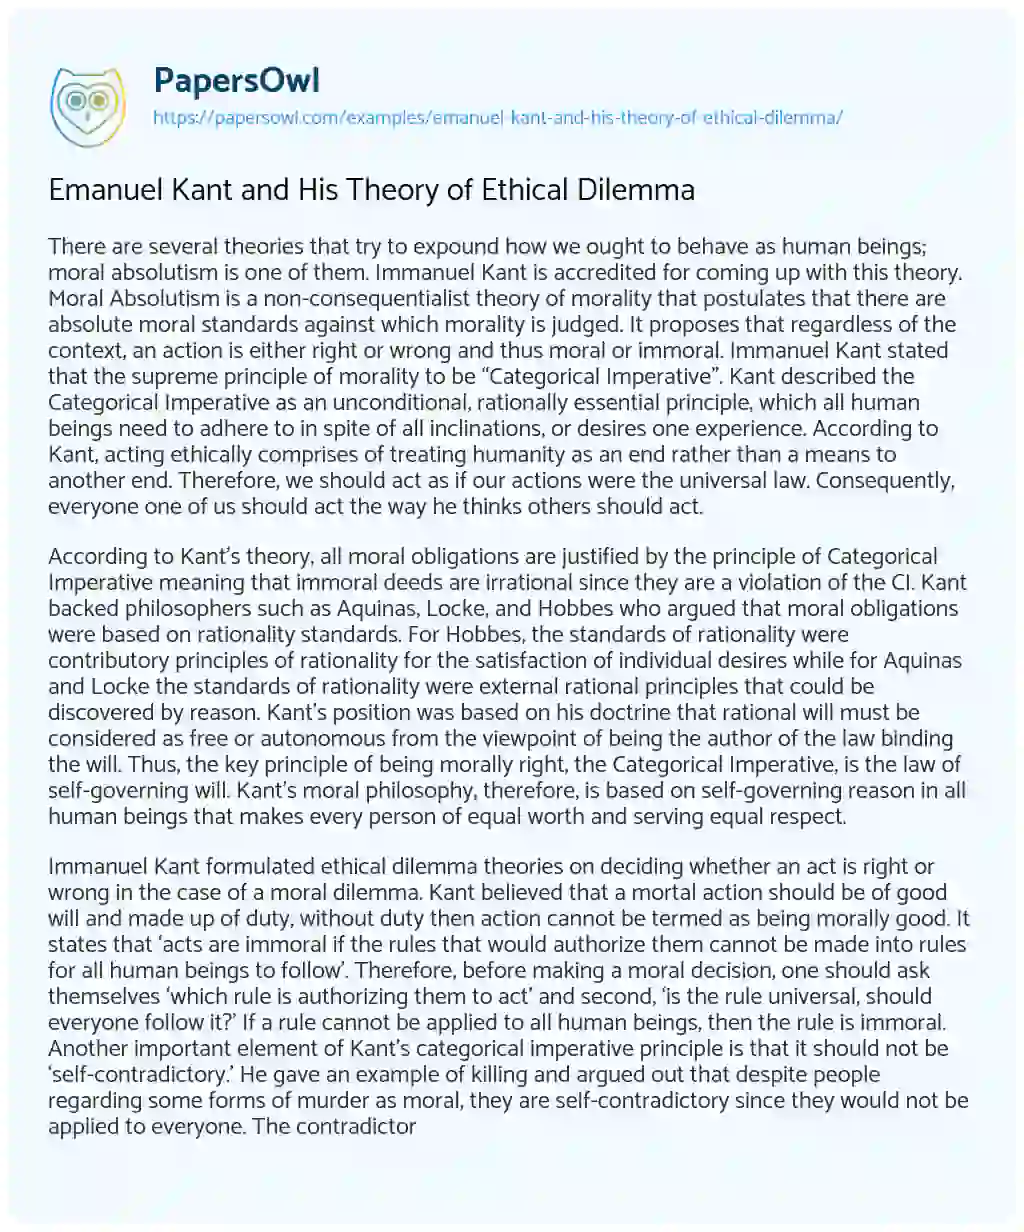 Essay on Emanuel Kant and his Theory of Ethical Dilemma